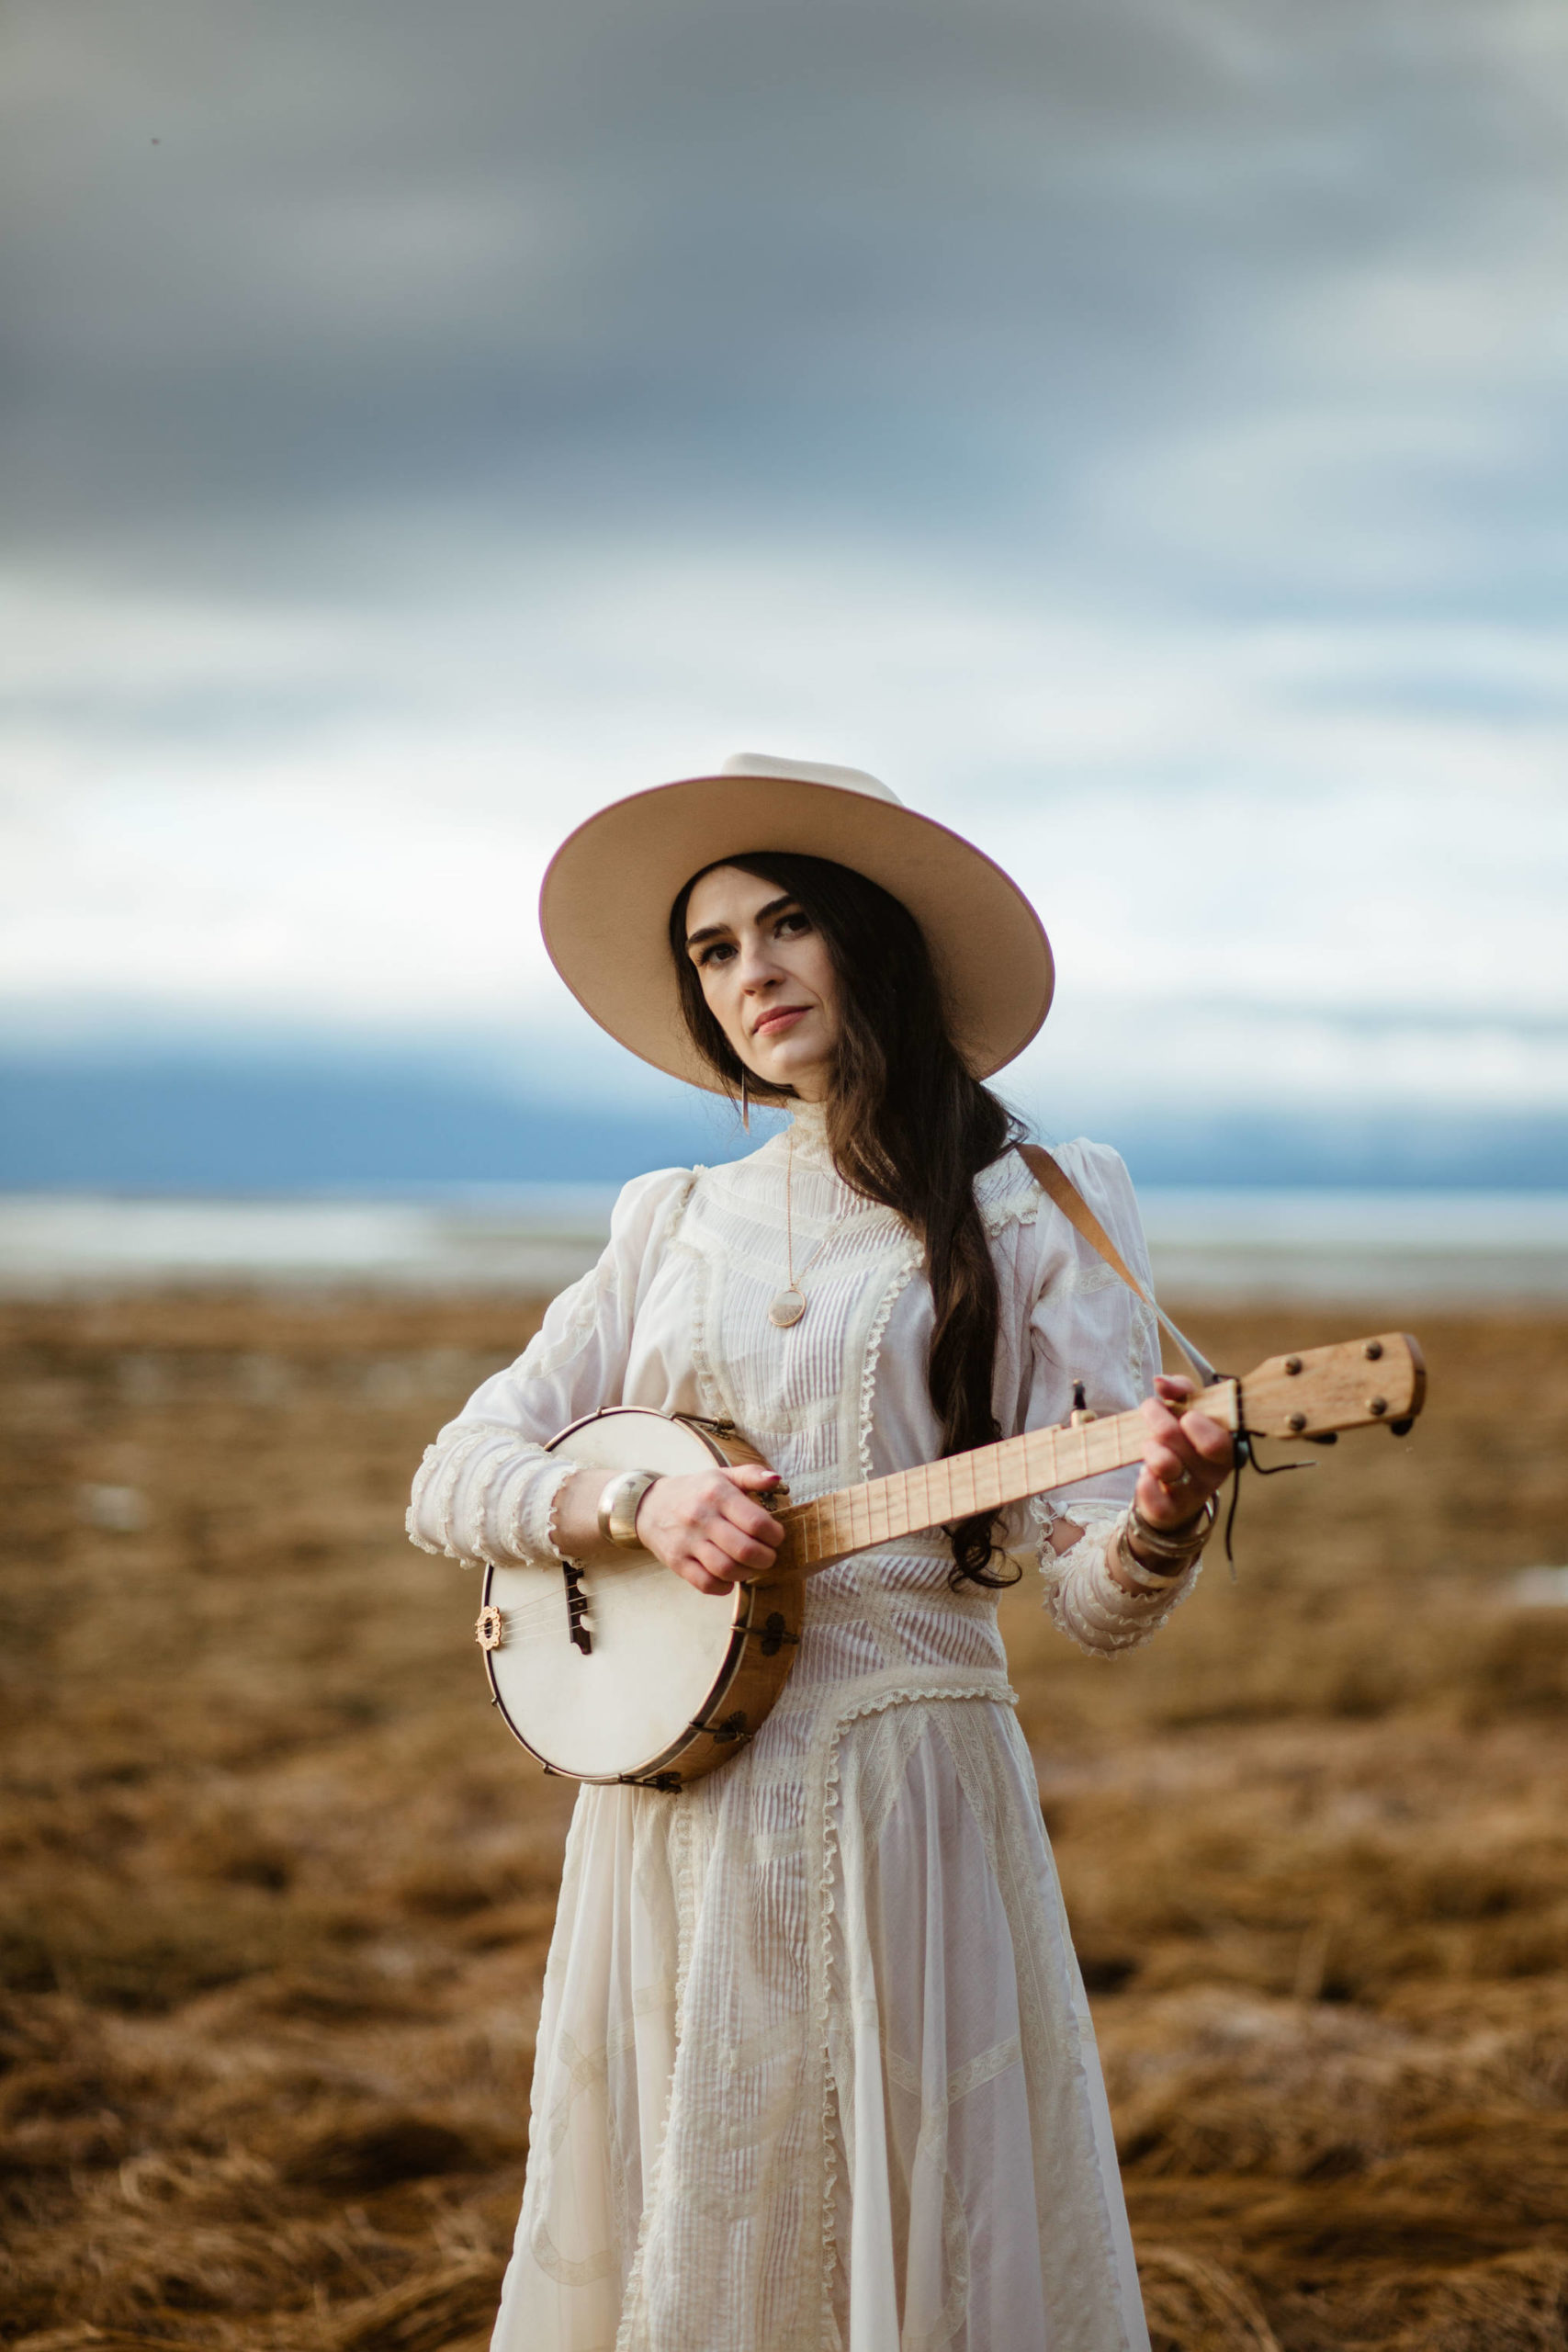 Courtesy Photo / Sydney Akagi
Annie Bartholomew, a Juneau-based singer-songwriter, wrote the musical play “Sisters of White Chapel: A Short But True Story,” which will be read as part of Theater Alaska’s Alaska Theater Festival.